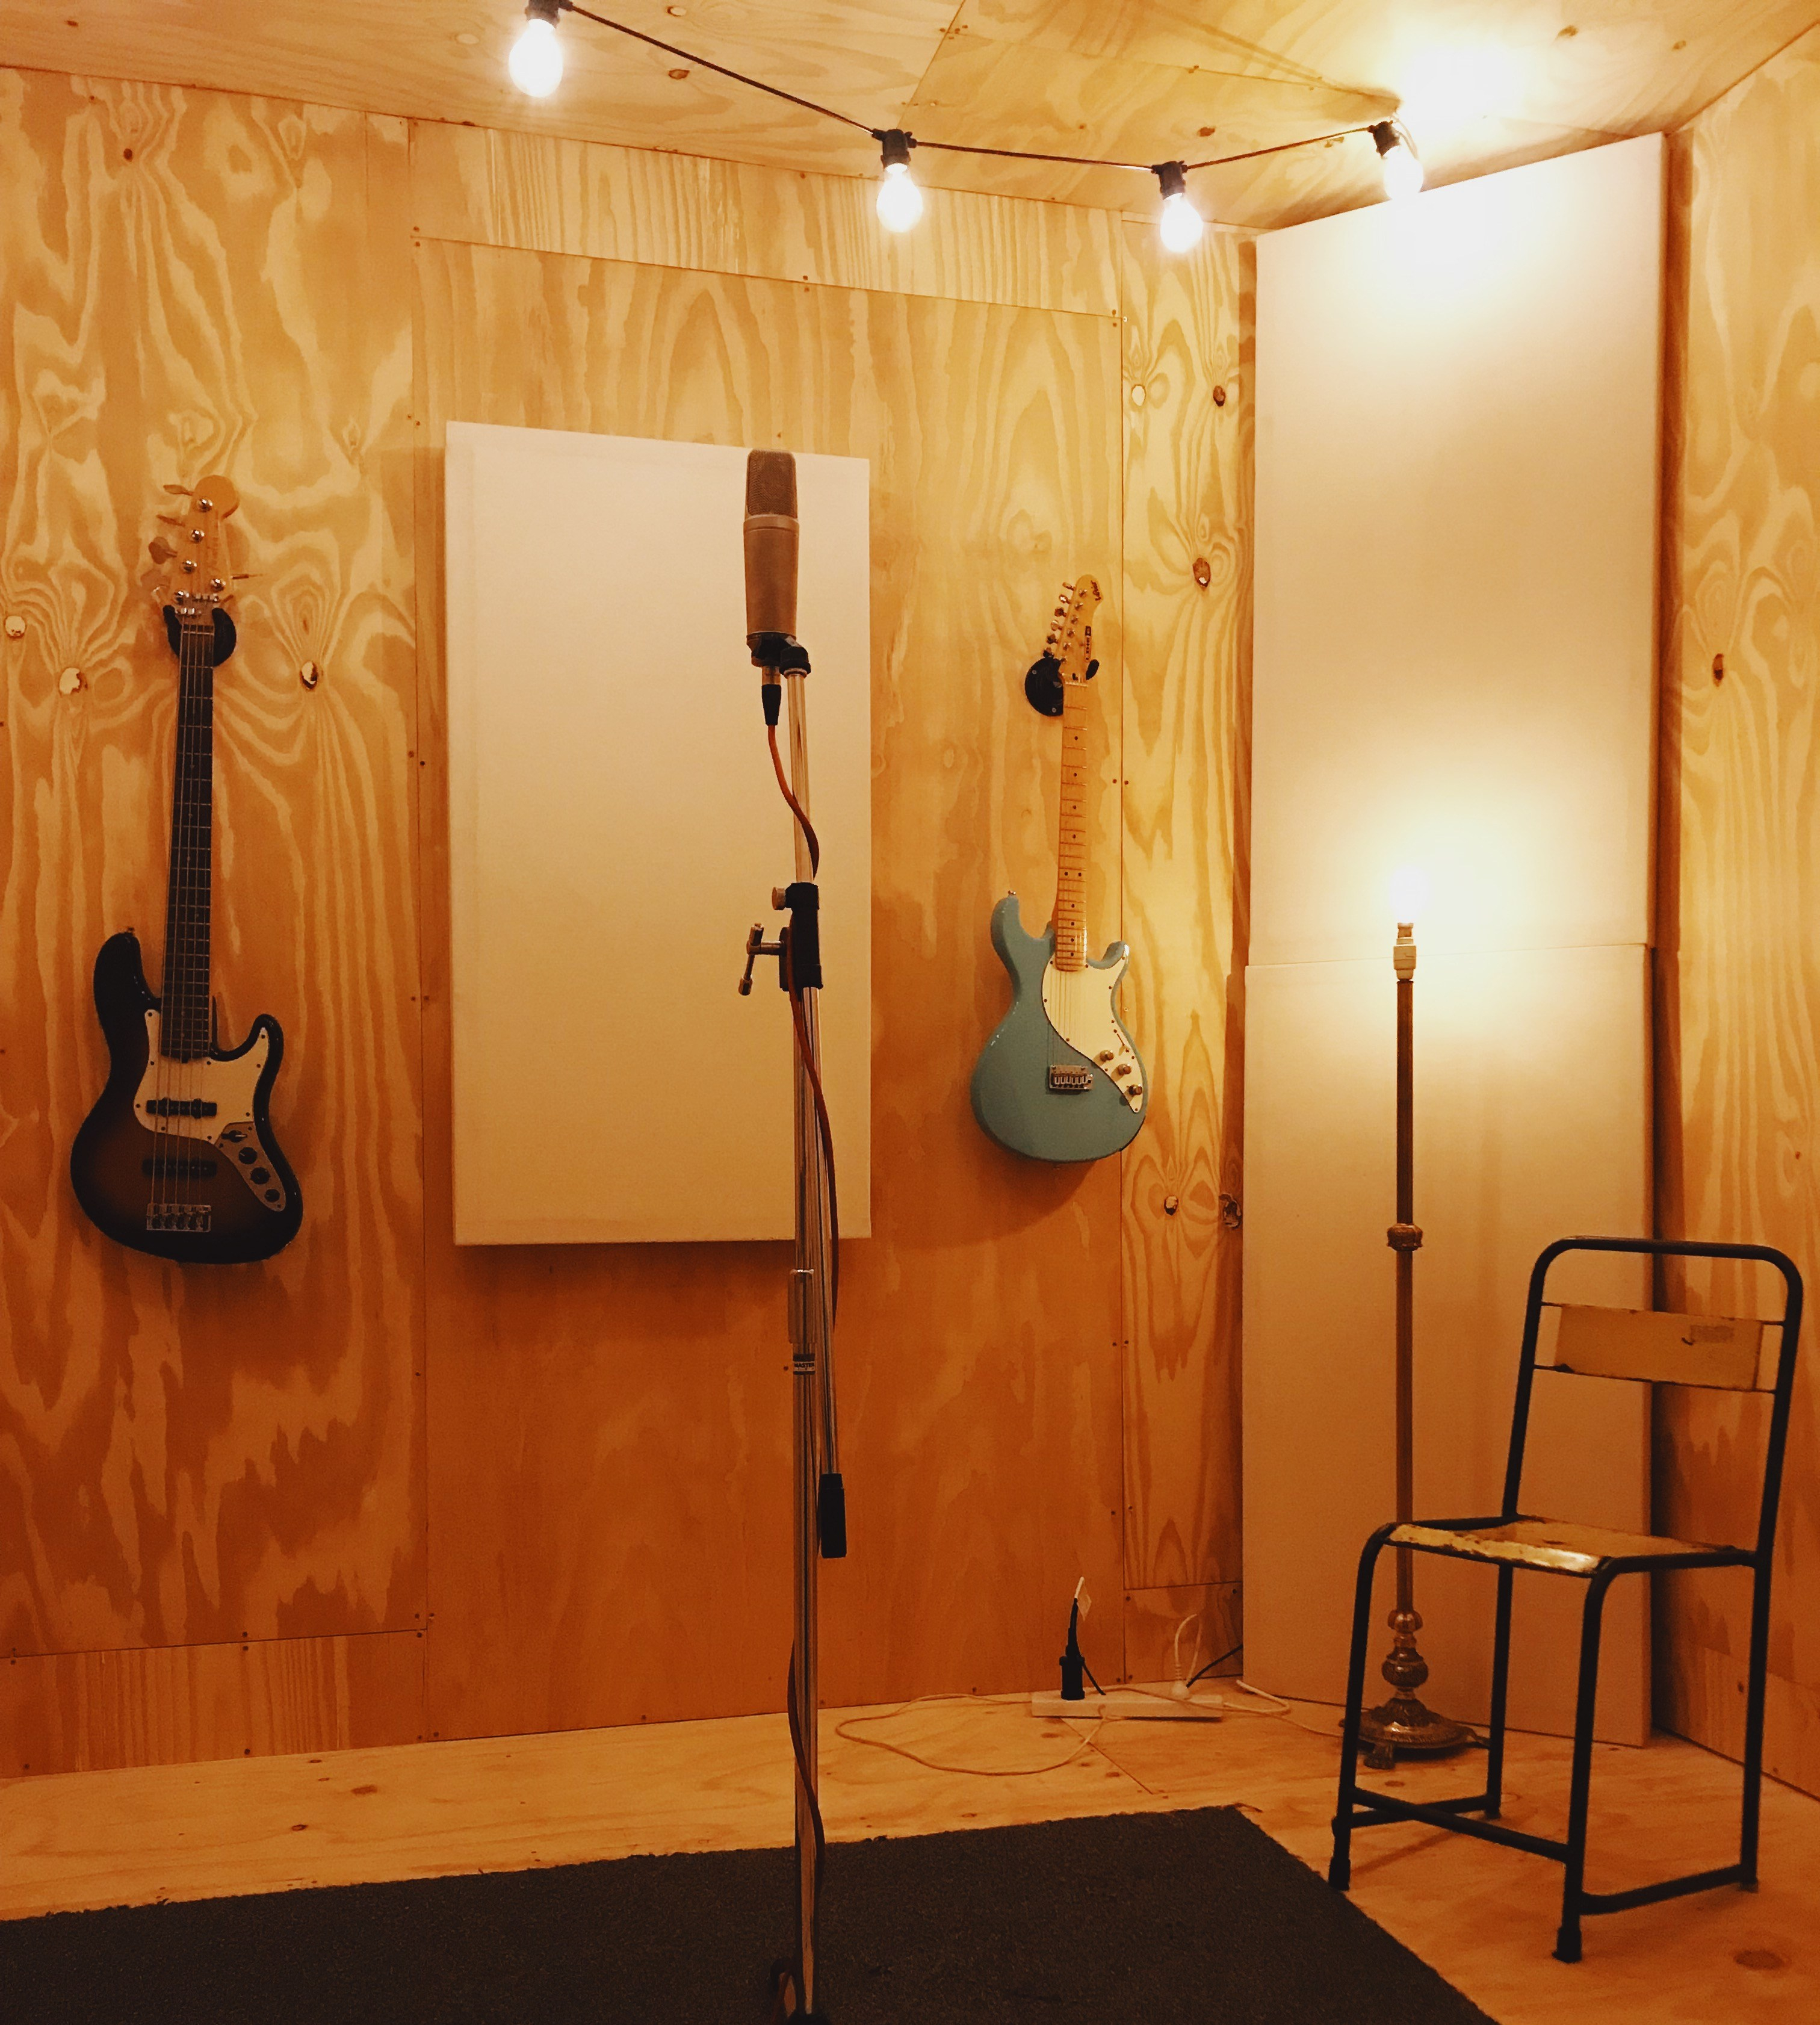 Check Out Our Recording Studio!